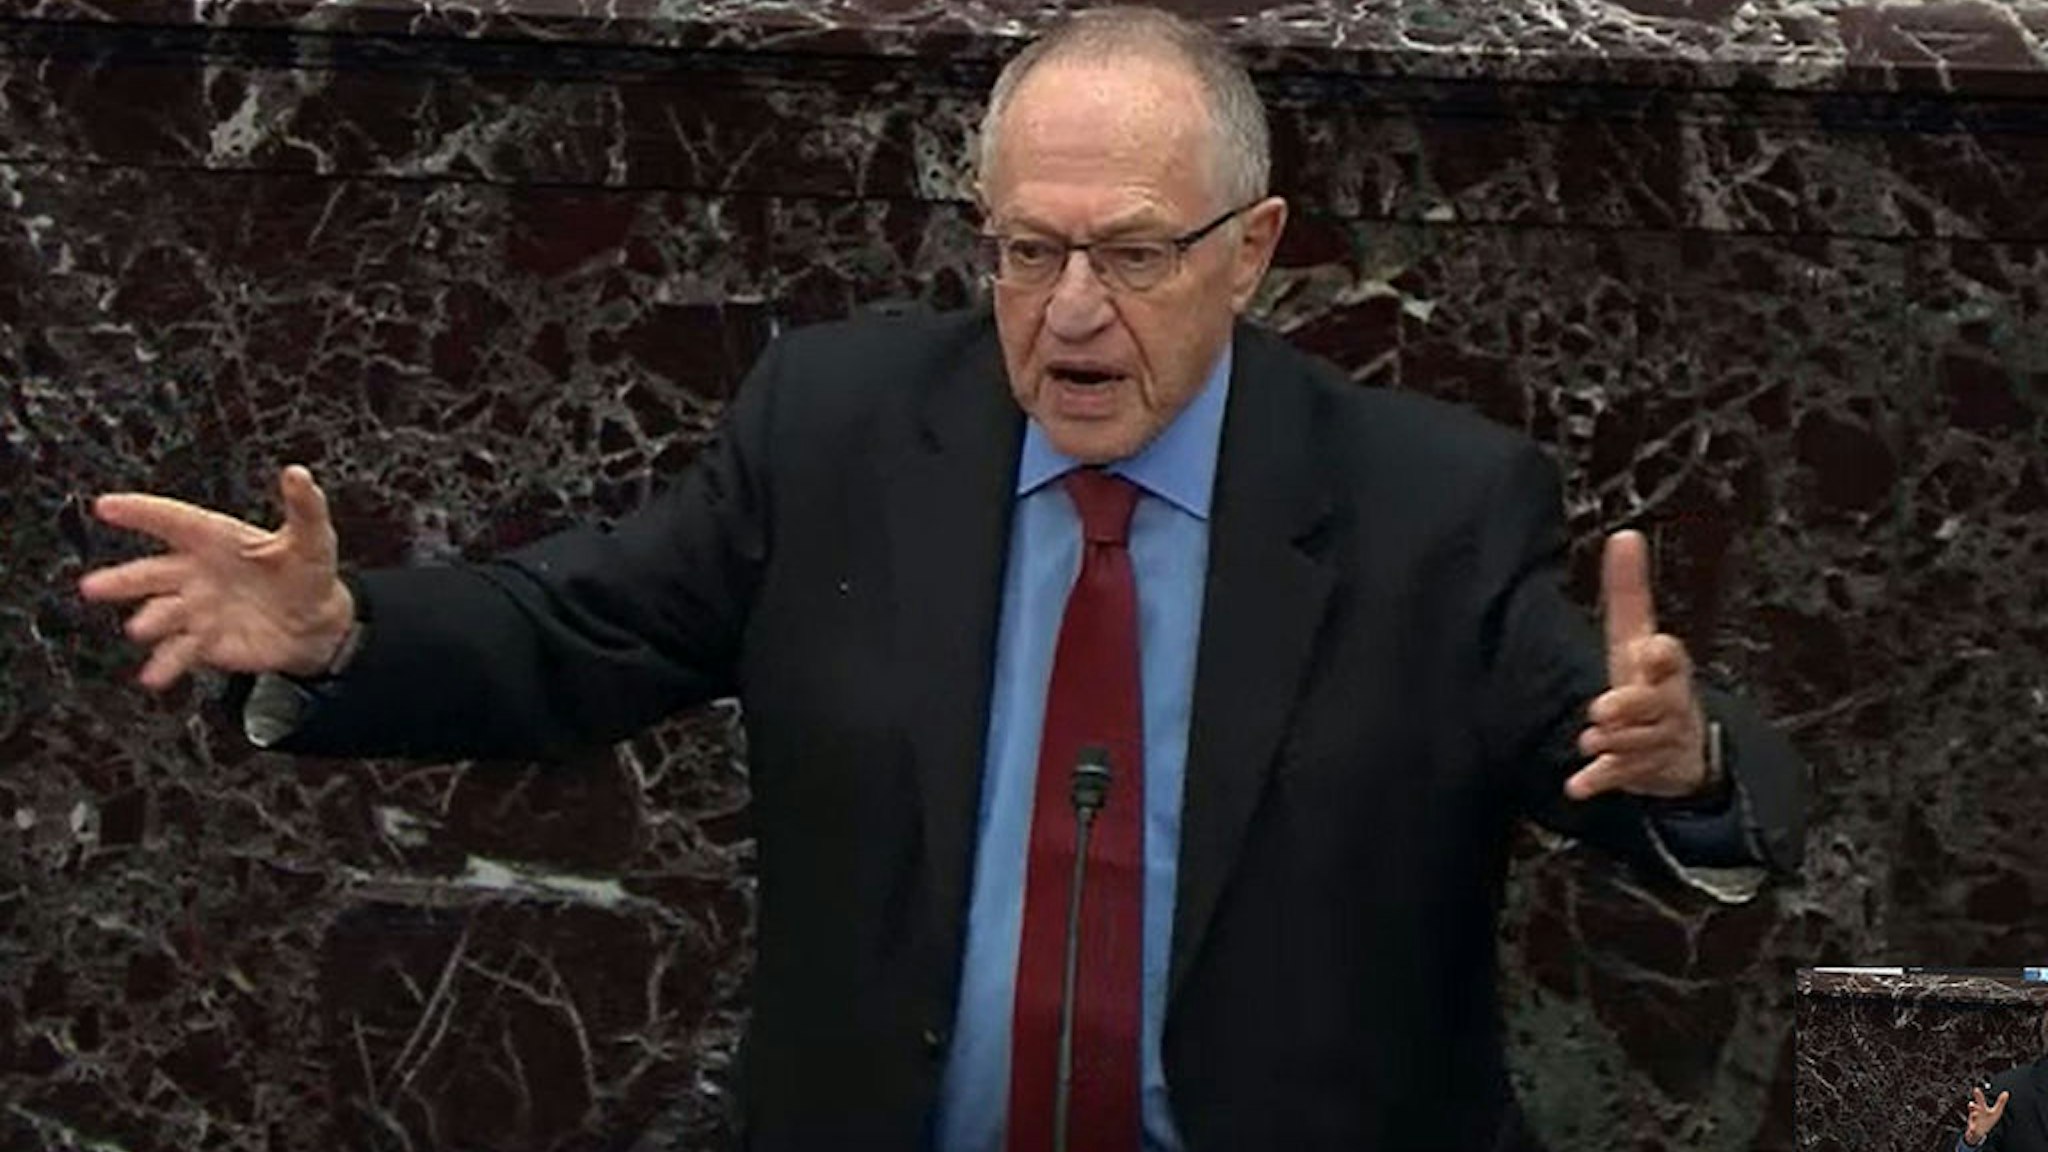 WASHINGTON, DC - JANUARY 29: In this screenshot taken from a Senate Television webcast, legal counsel for President Donald Trump, Alan Dershowitz answers a question from a senator during impeachment proceedings in the Senate chamber at the U.S. Capitol on January 29, 2020 in Washington, DC. Senators have 16 hours to submit written questions to the House managers and the President's defense team. (Photo by Senate Television via Getty Images)